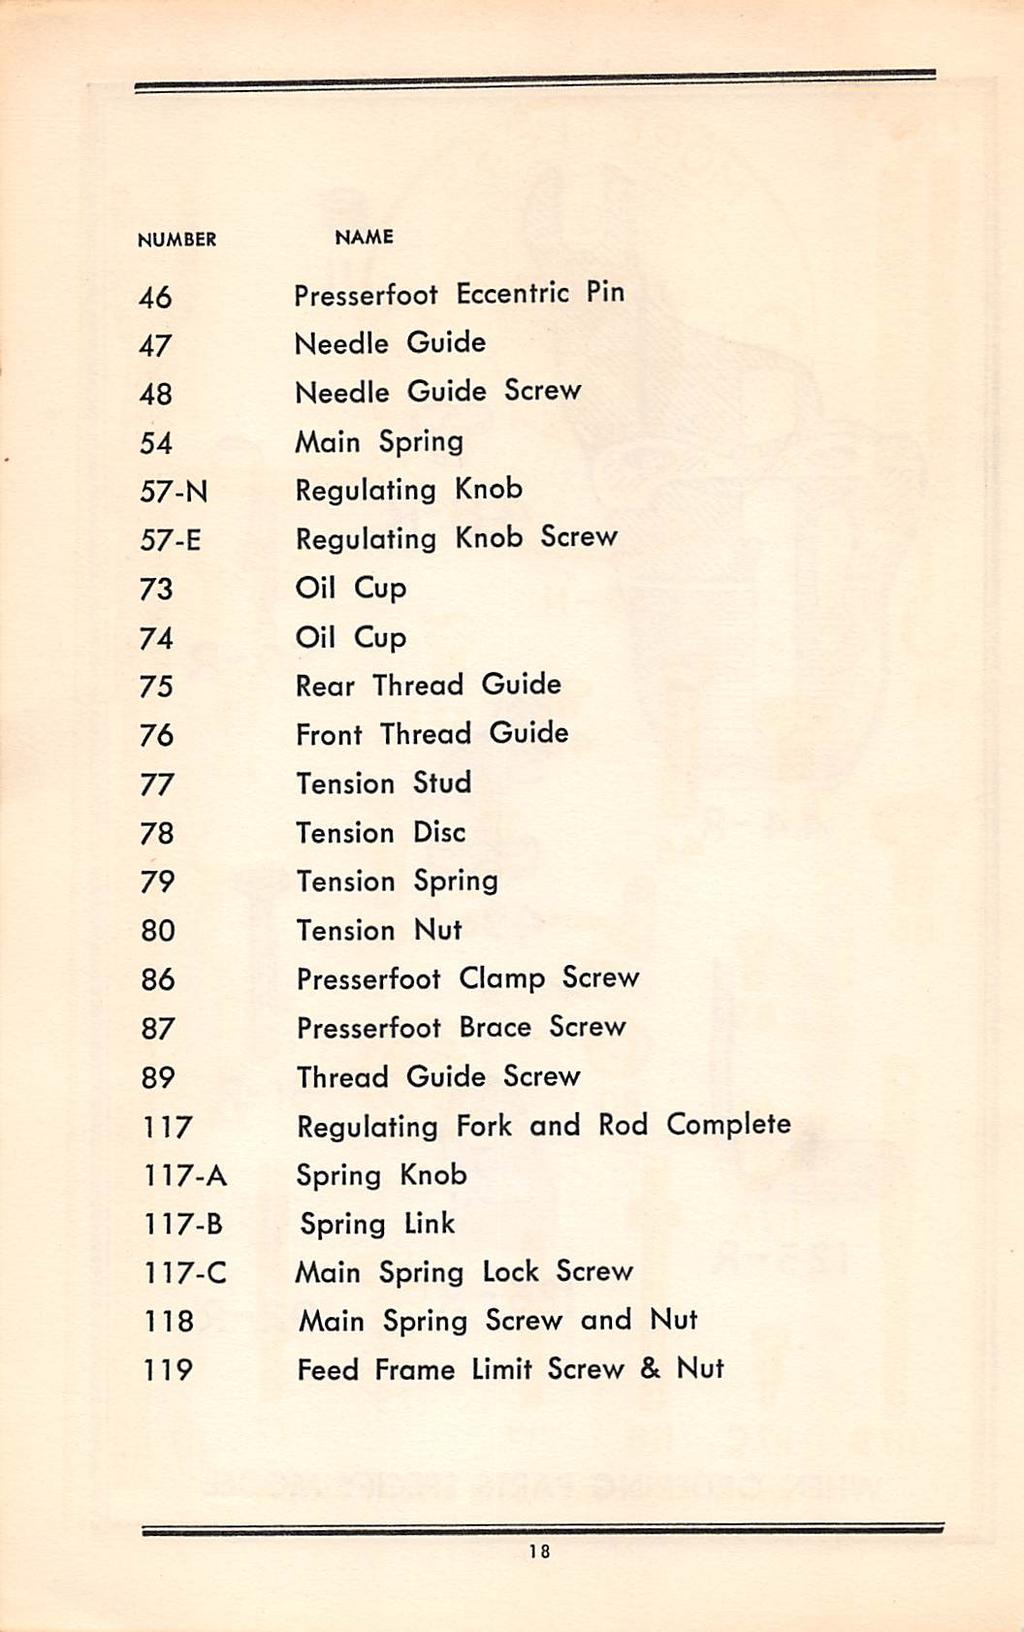 NUMBER NAME 46 Presserfoot Eccentric Pin 47 Needle Guide 48 Needle Guide Screw 54 Main Spring 57-N Regulating Knob 57-E Regulating Knob Screw 73 Oil Cup 74 Oil Cup 75 Rear Thread Guide 76 Front